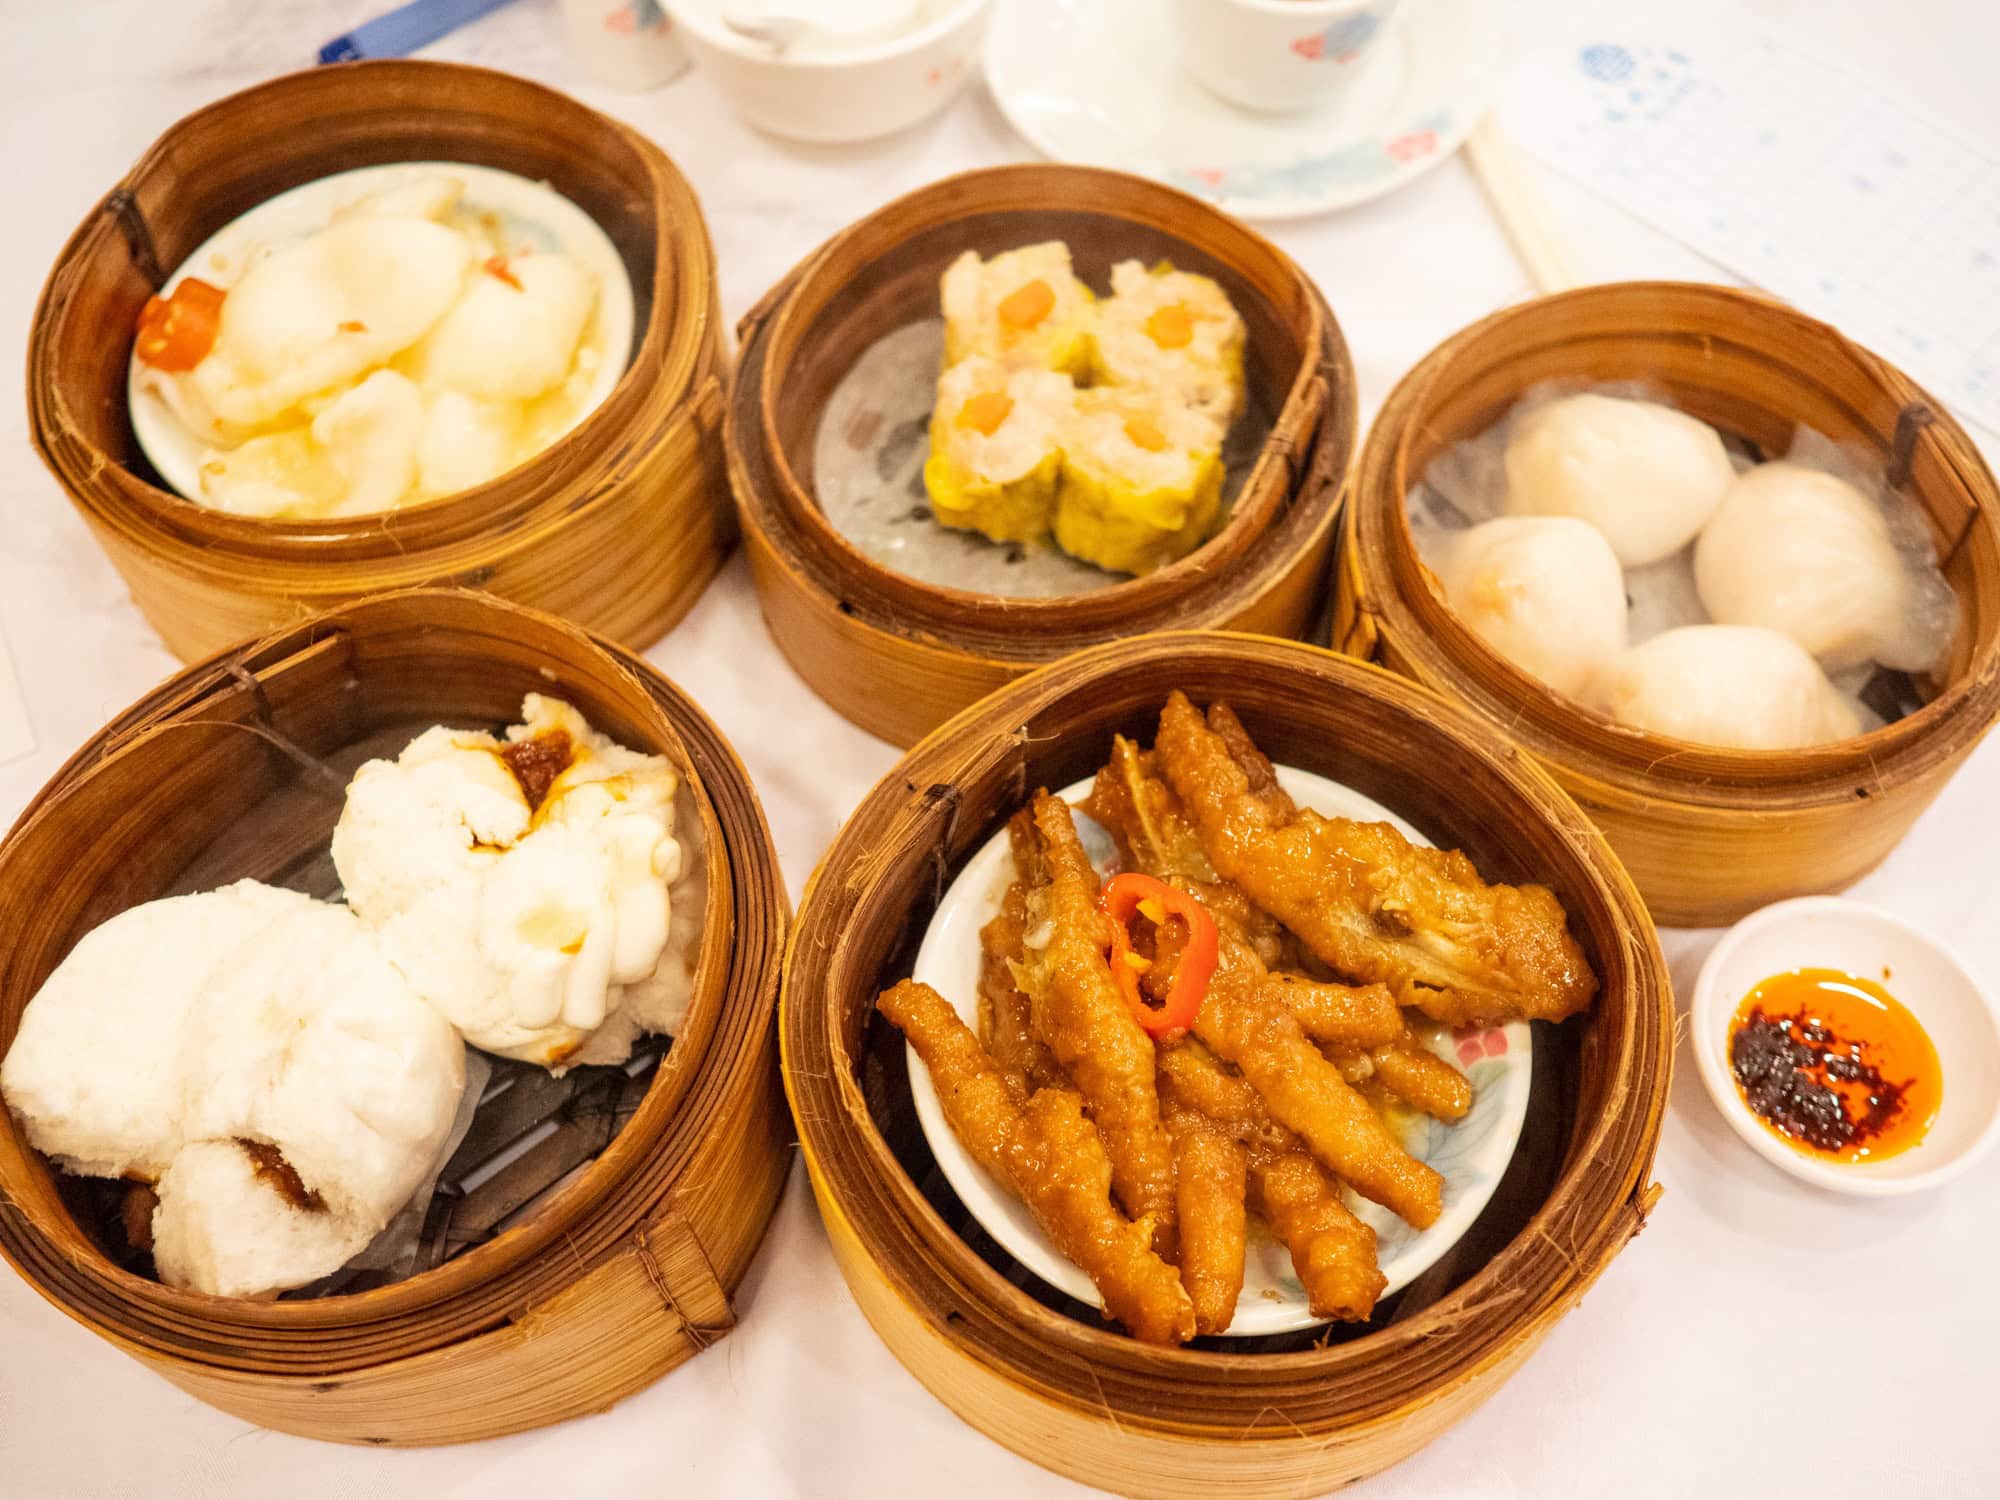 dimsum meaning